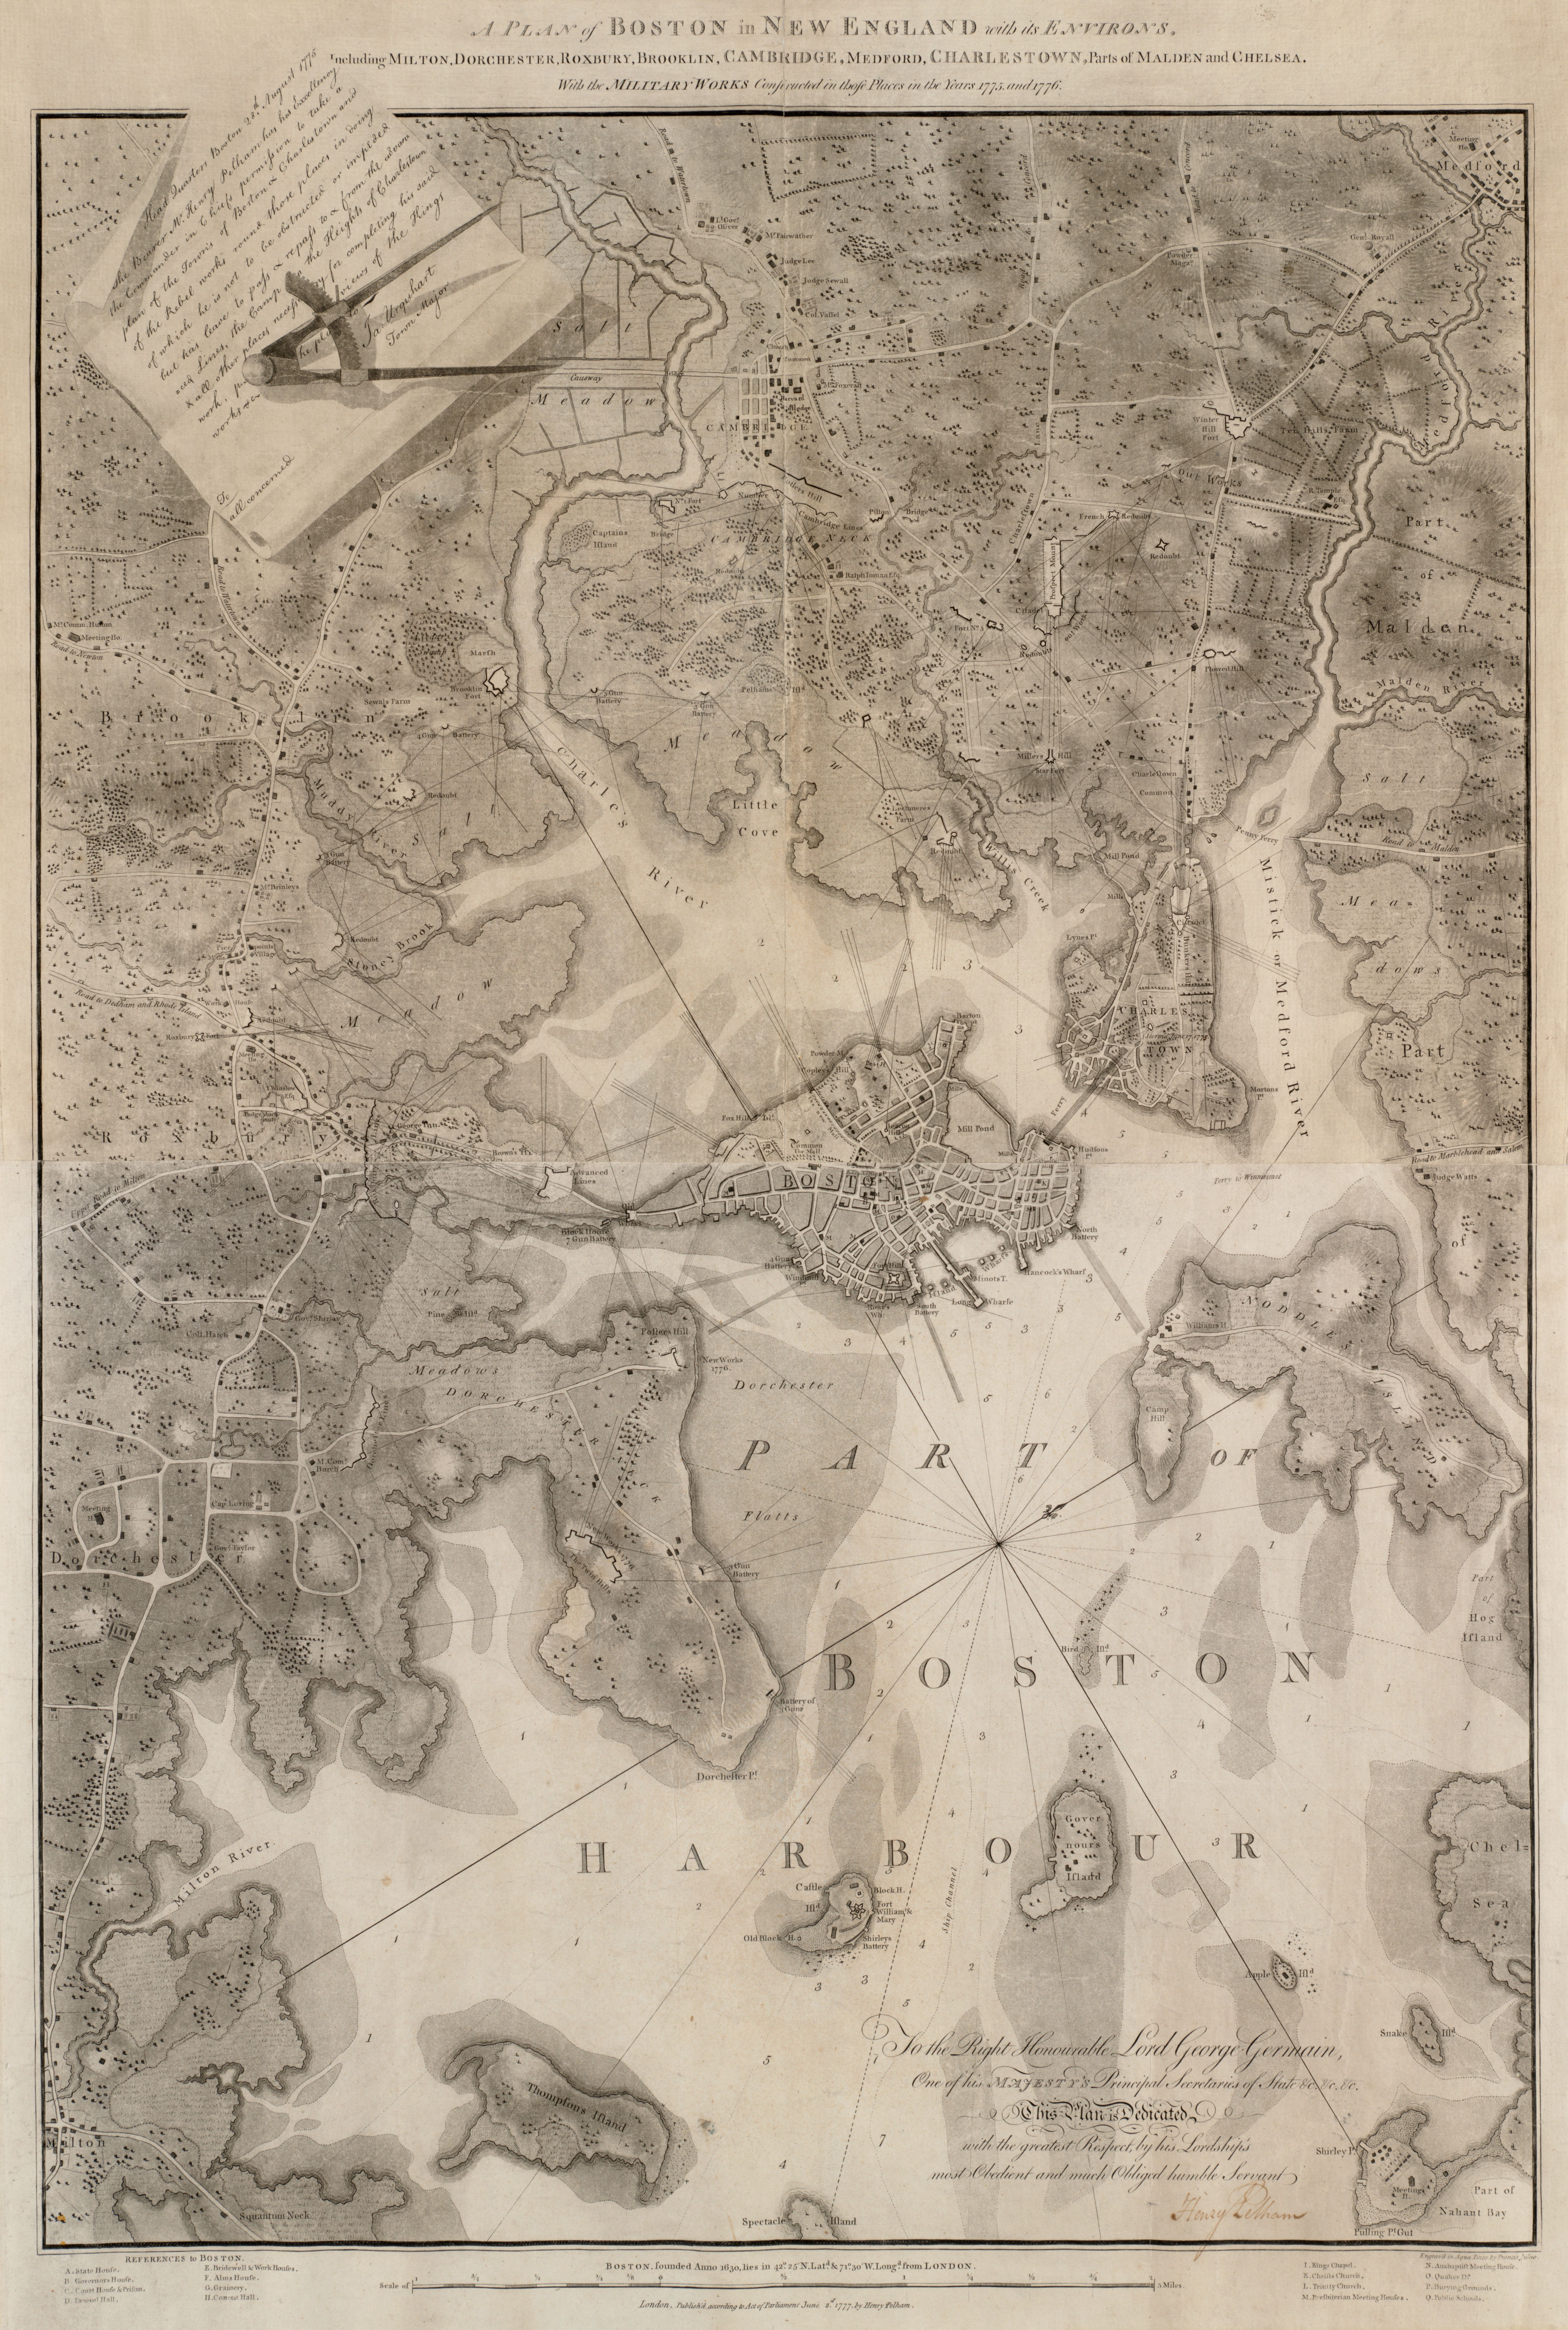 Image of Henry Pelham's "A Plan of Boston in New England," 1777